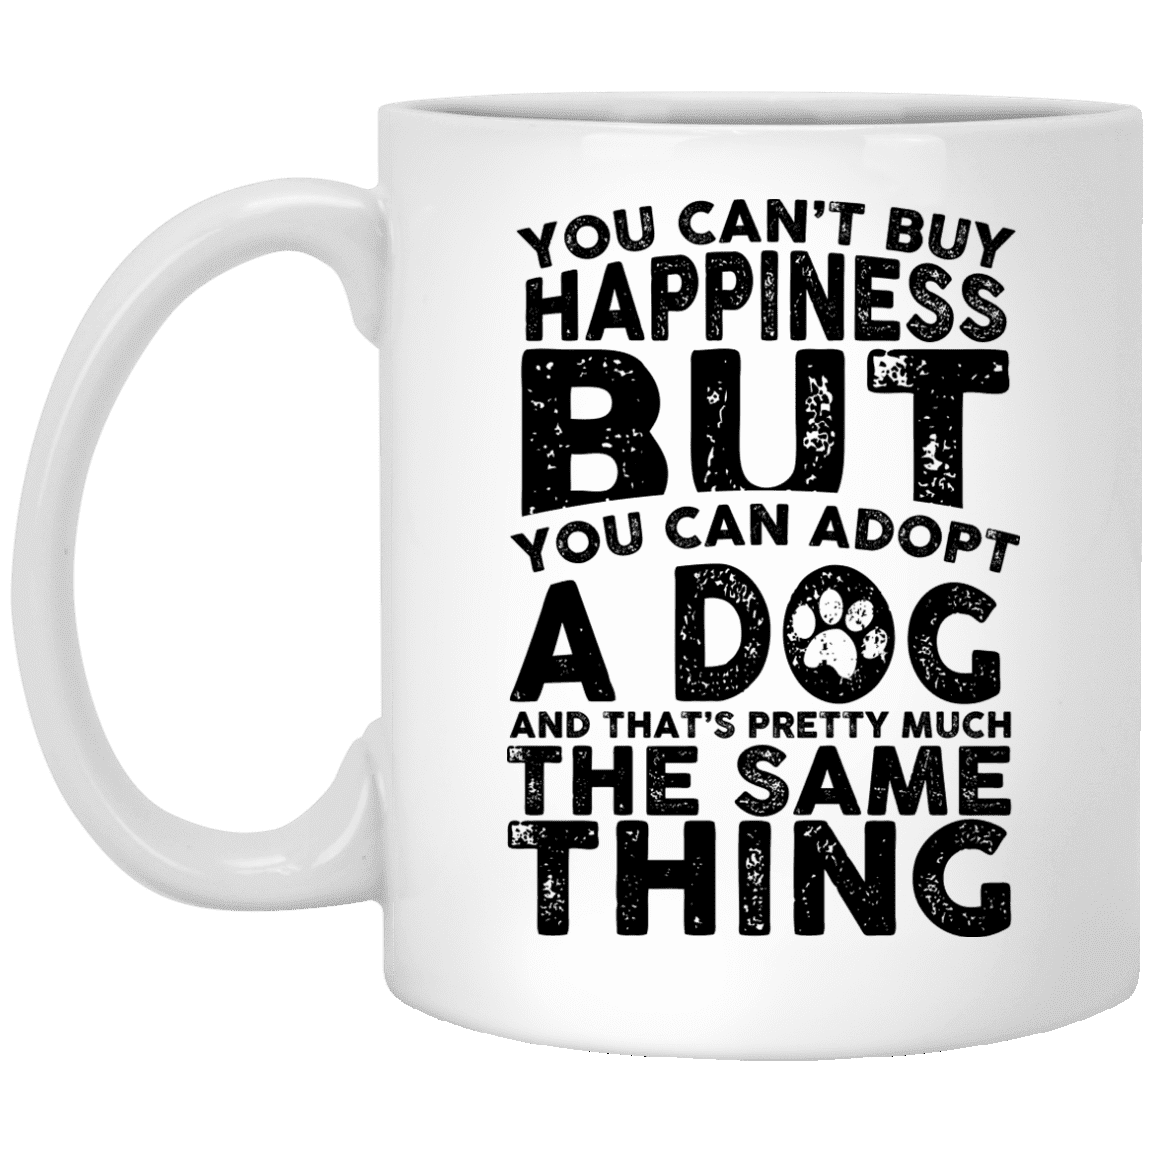 You Cant Buy Happiness - Mugs.